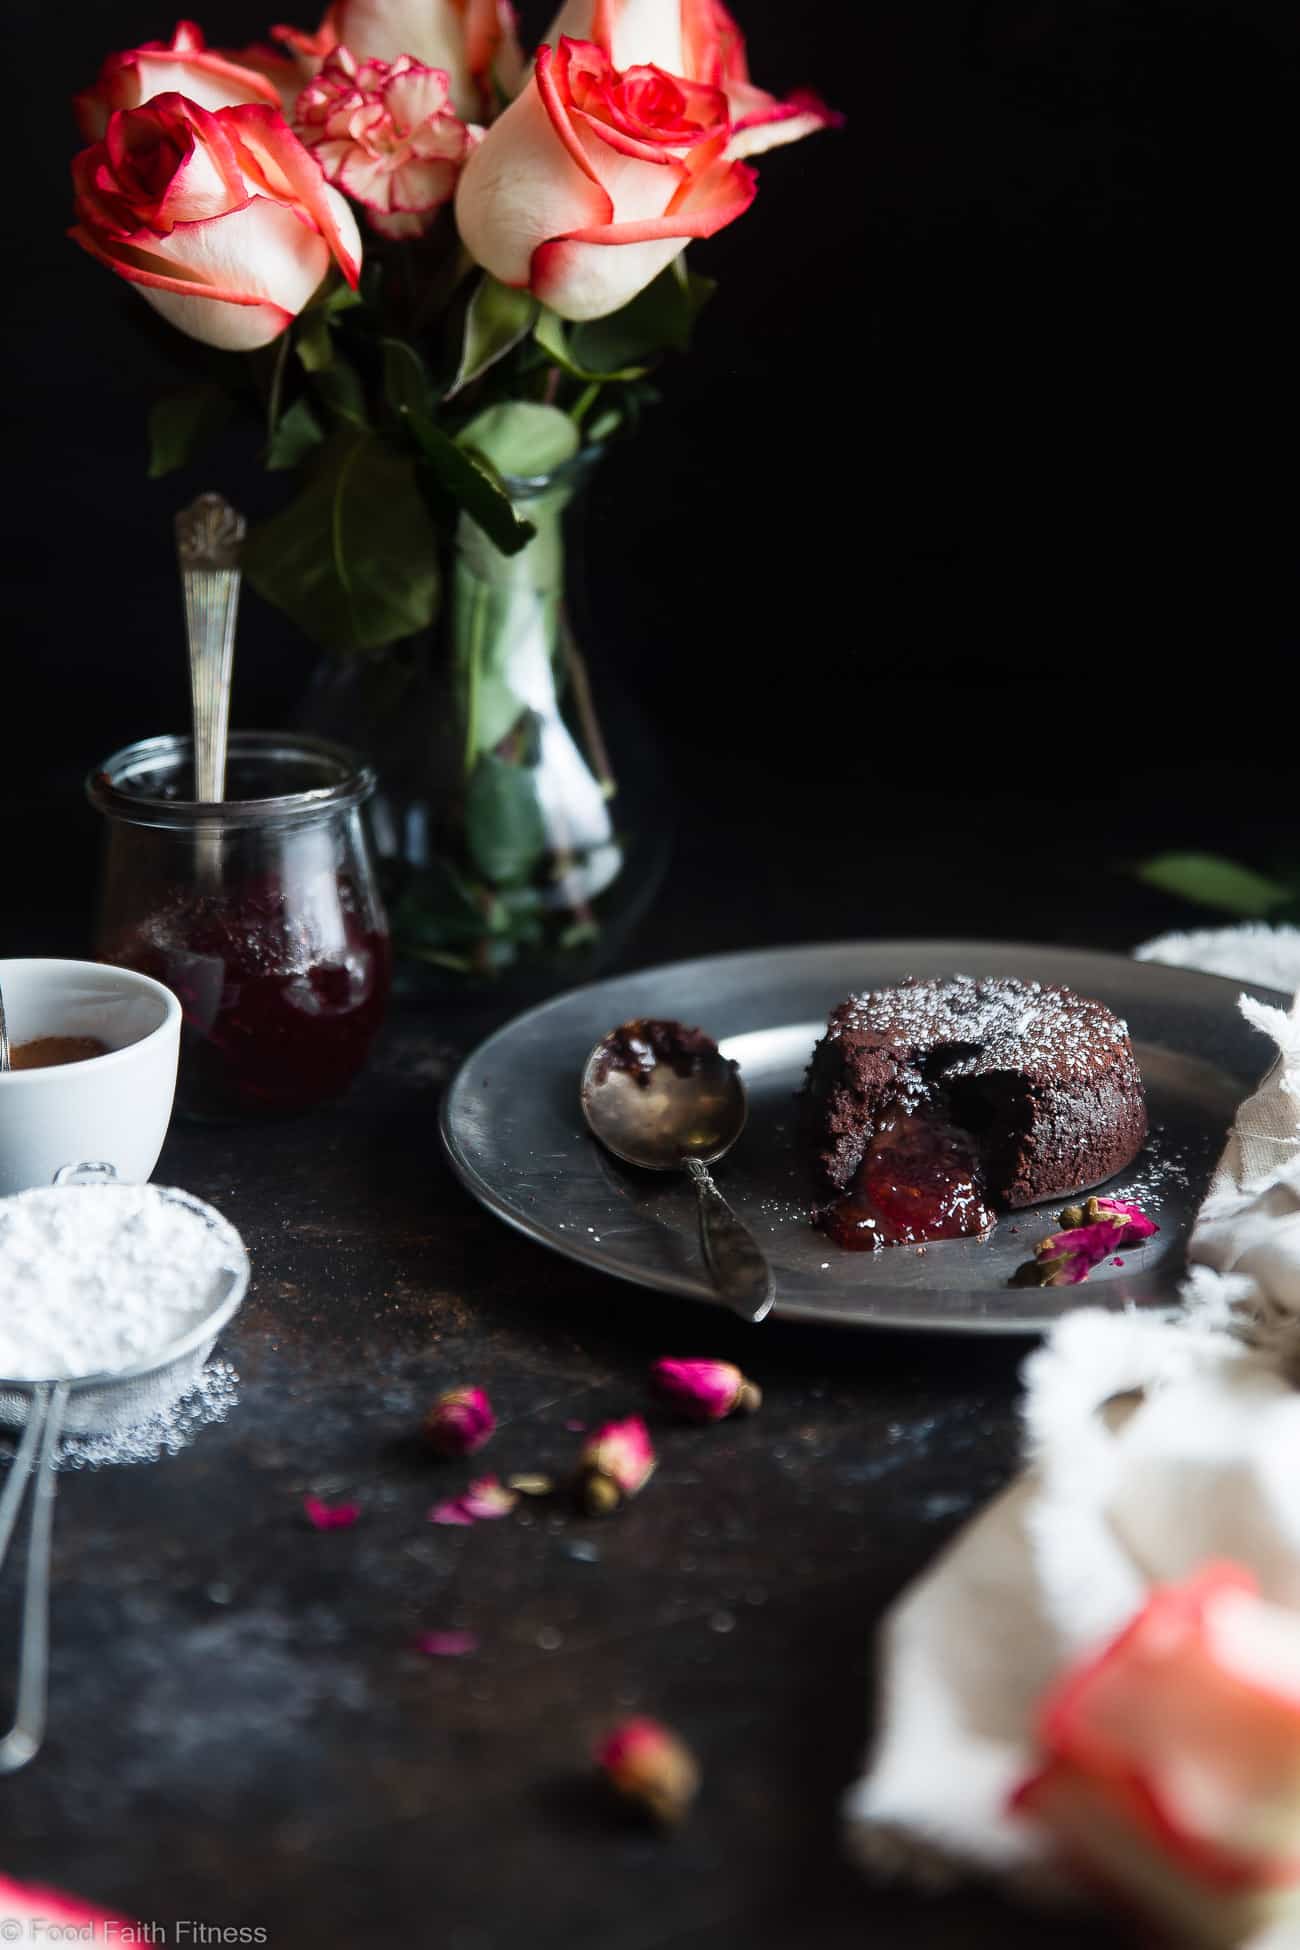 Gluten Free Chocolate Strawberry Lava Cakes for Two - These ooey-gooey, rich and FUDGY lava cakes are a 15 minute dessert that feels SO fancy!  They're gluten/grain/dairy free and better for you too!  |  #Foodfaithfitness |  #Glutenfree #Lavacake #ValentinesDay #Strawberry #DairyFree